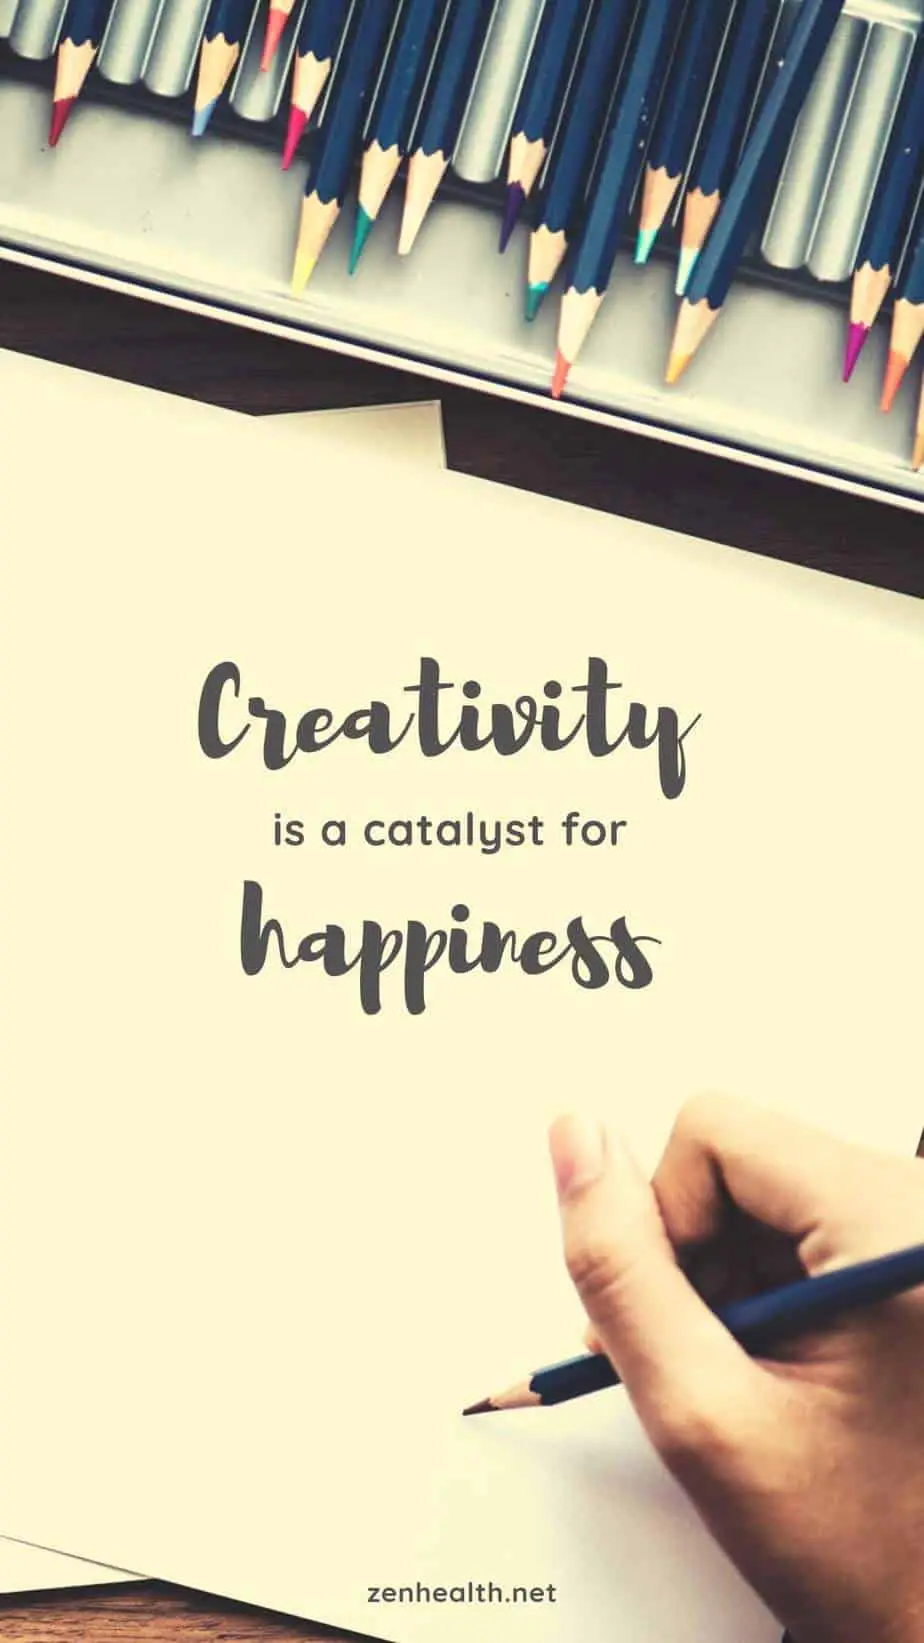 Creativity is a catalyst for happiness.